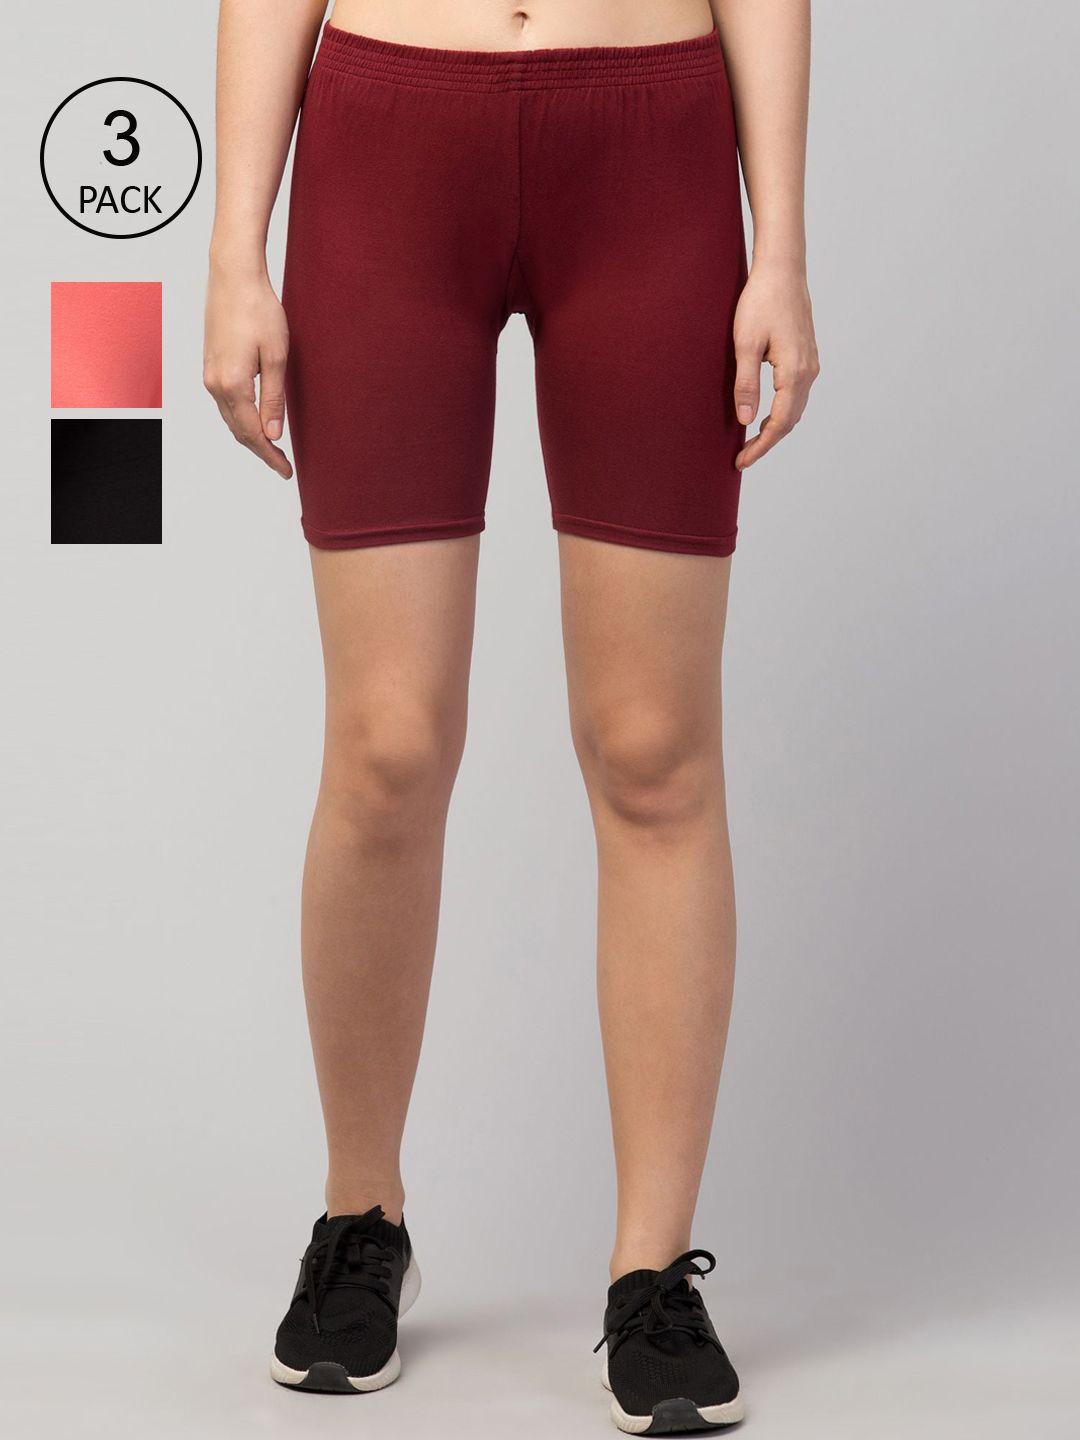 apraa & parma women maroon & black  slim fit pack of 3 cycling sports shorts